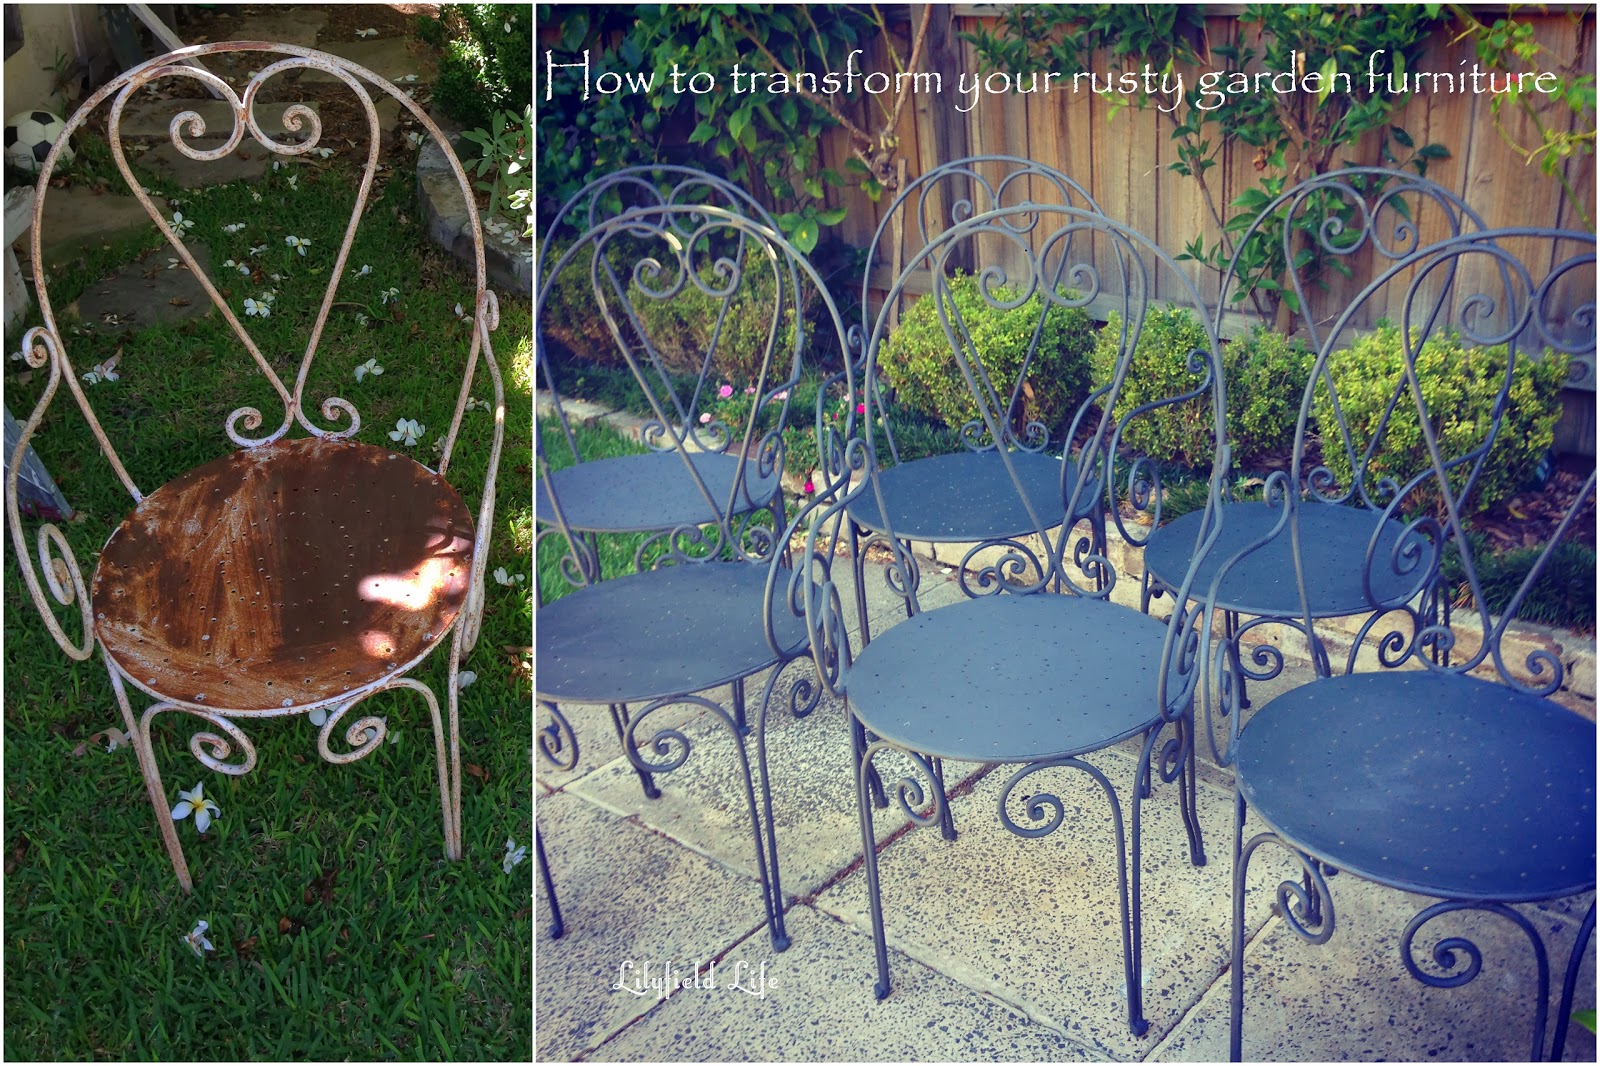 Painting Rusty Garden Furniture, How To Treat Rusty Garden Furniture